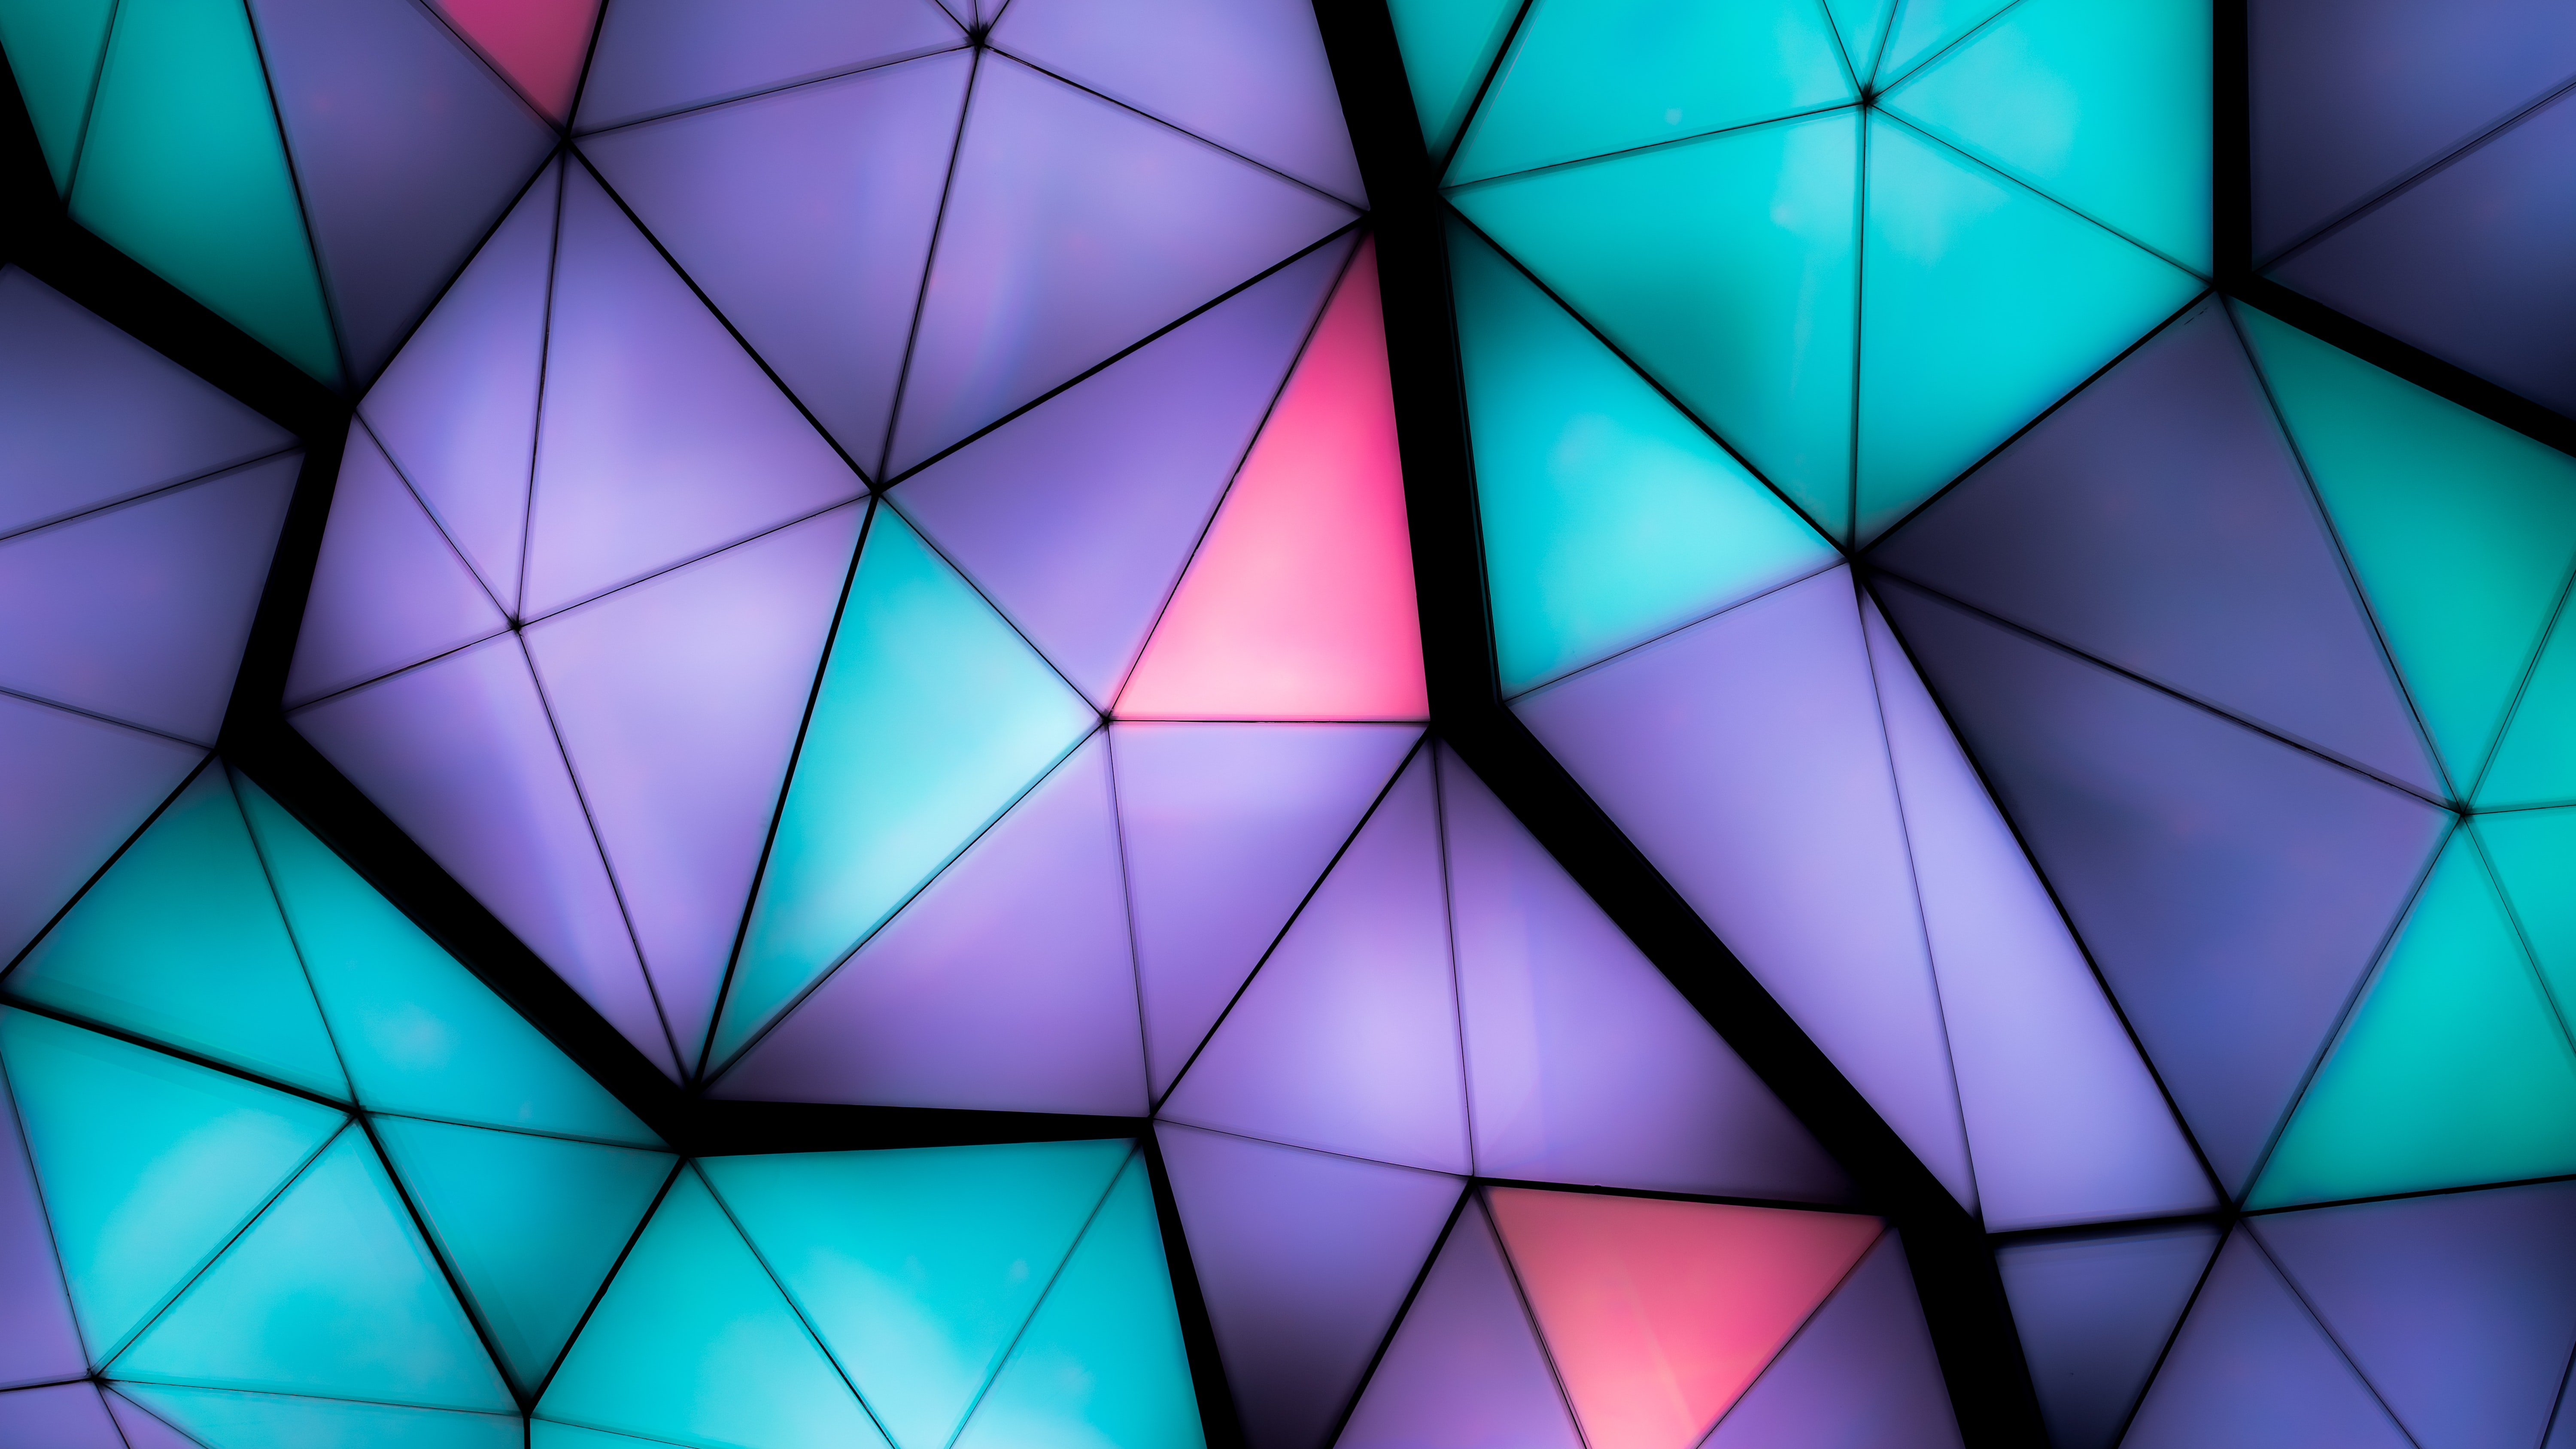 fragments, multicolored, motley, texture, textures, backlight, illumination, volume, triangles wallpaper for mobile